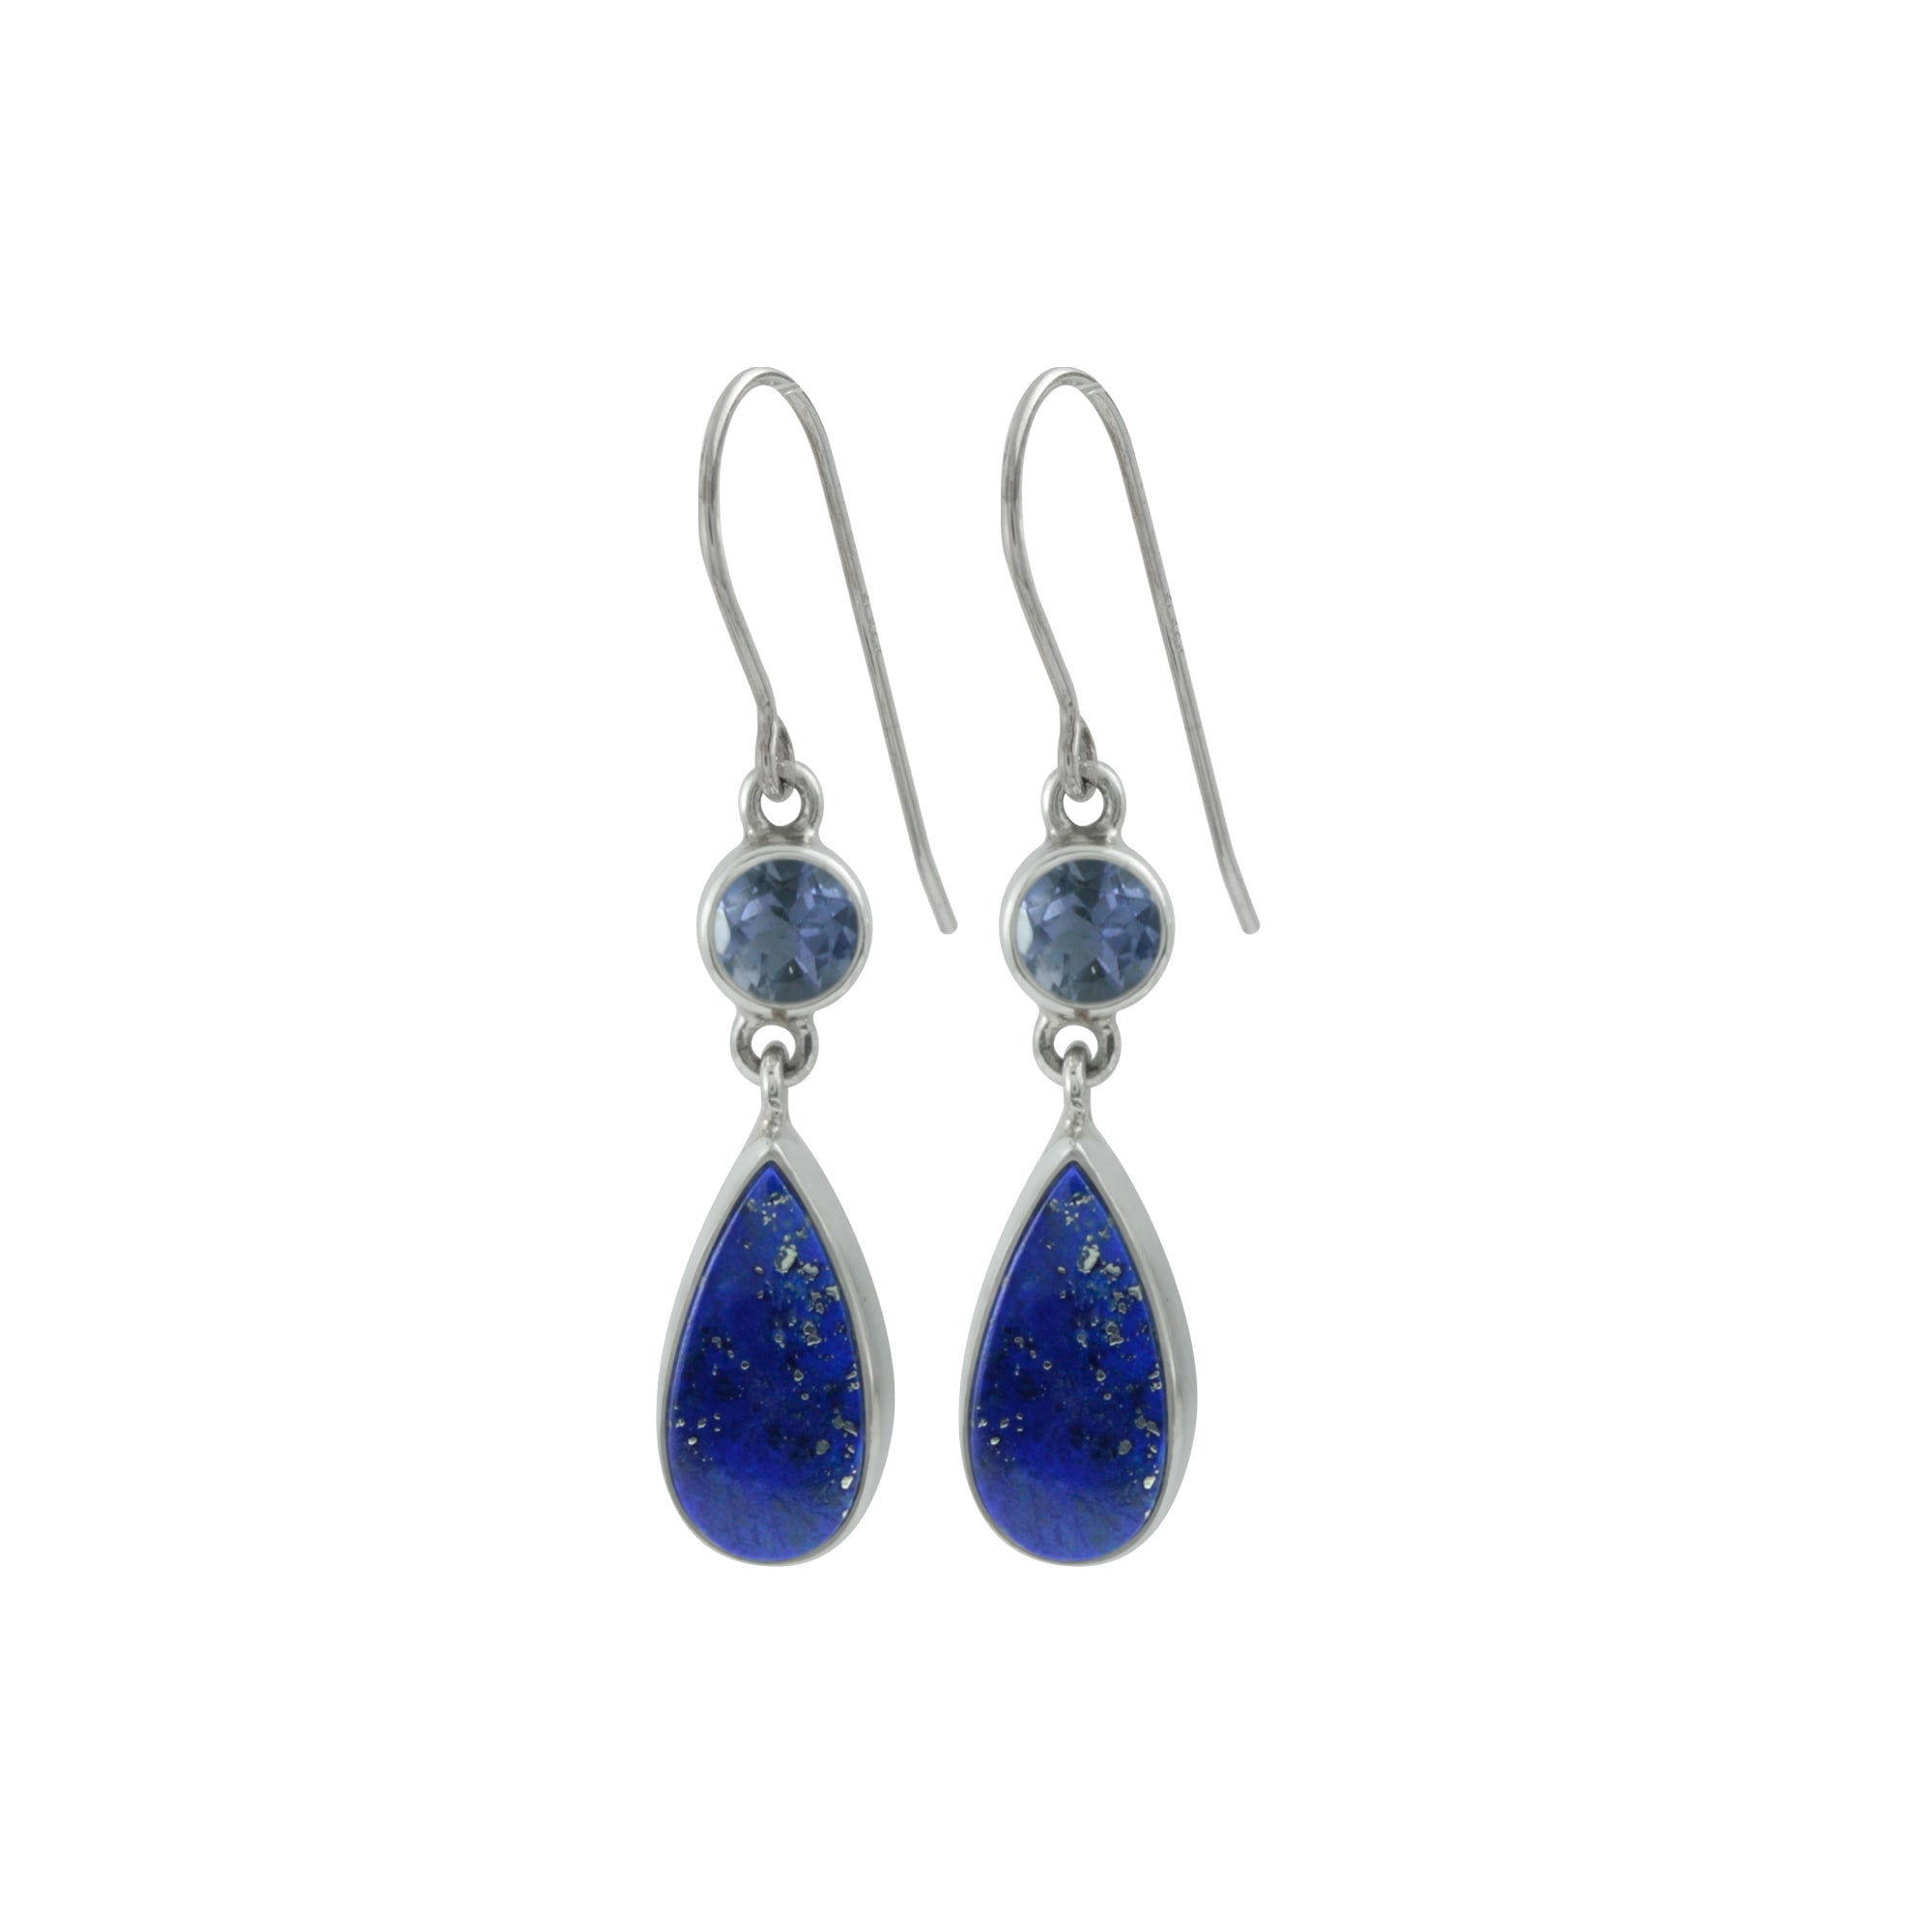 Blue Topaz and Lapis Teardrop Earrings. It's all about the Blues!